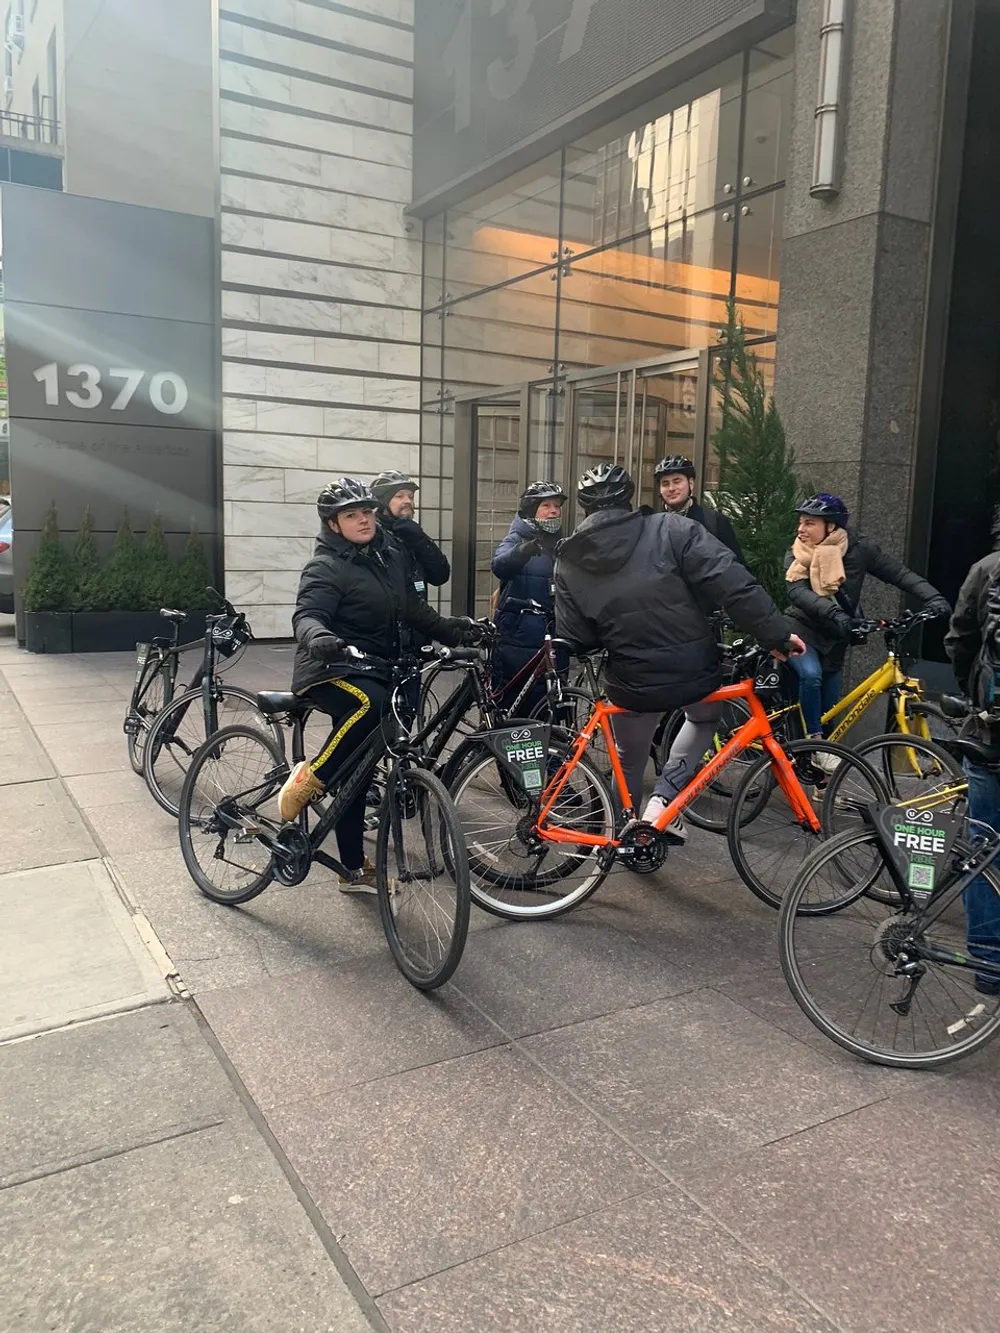 A group of cyclists wearing helmets is gathered on a city sidewalk with some bikes featuring branding suggesting they may be part of a bike-sharing program